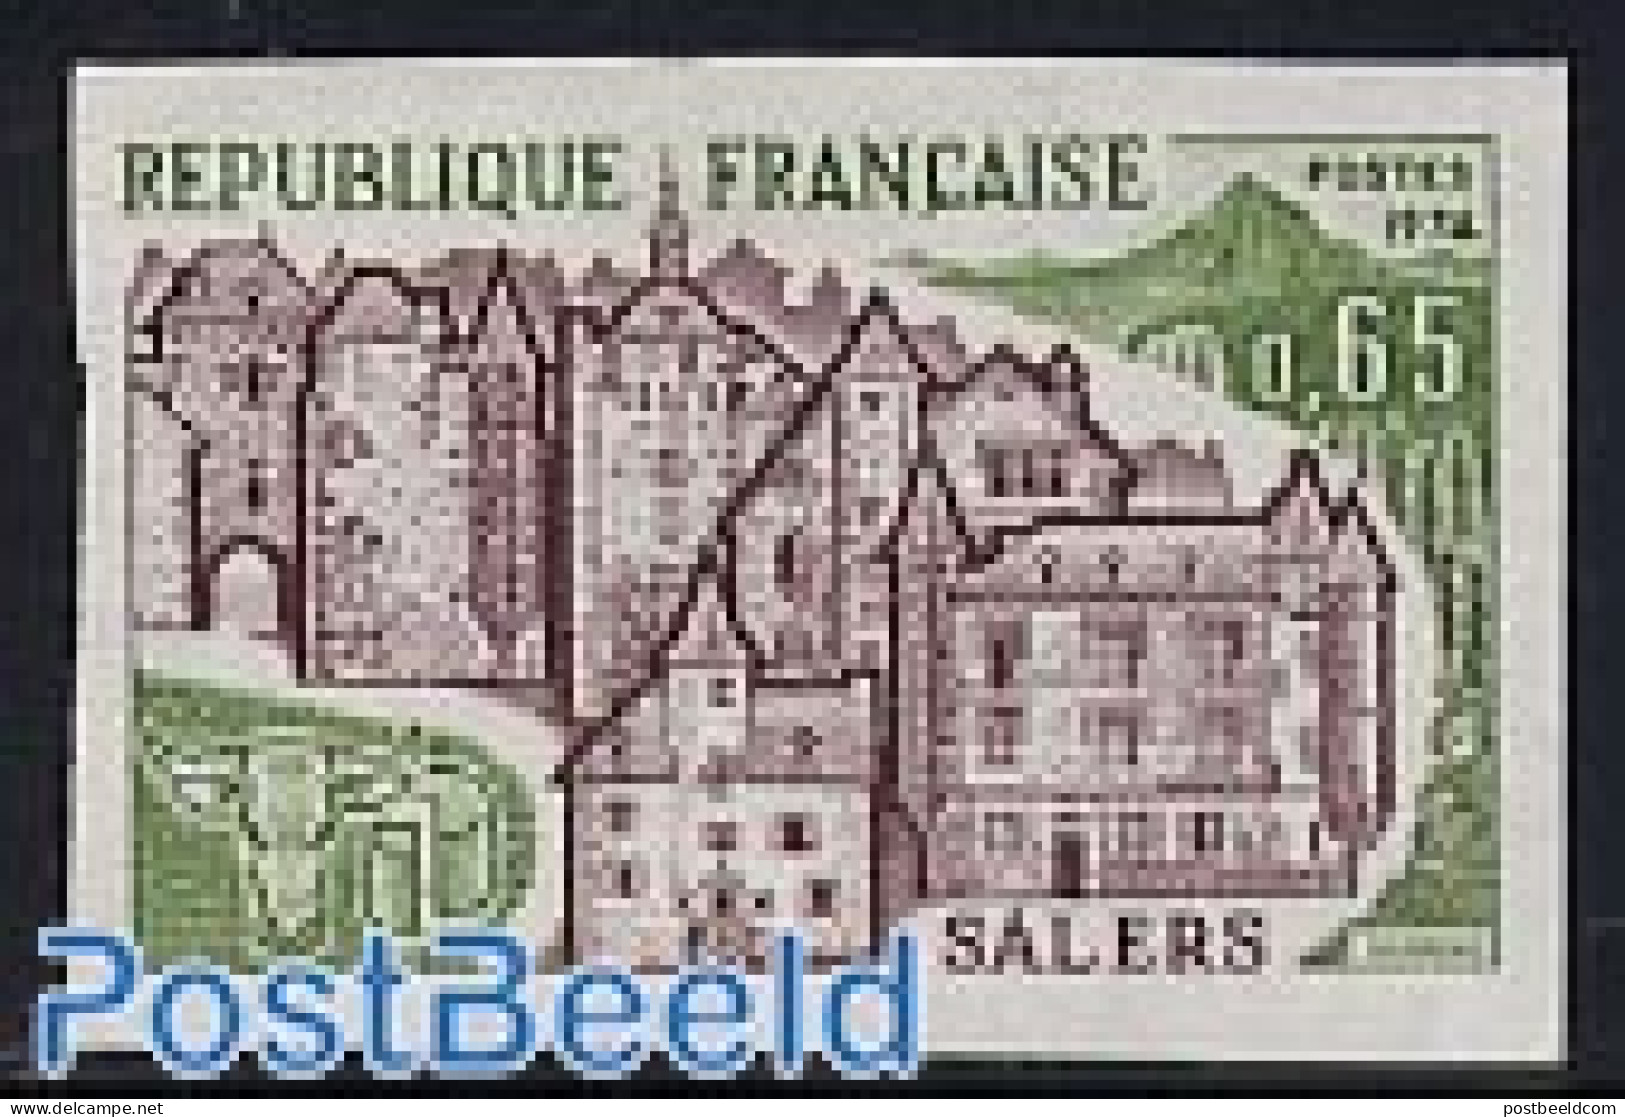 France 1974 Salers 1v Imperforated, Mint NH - Neufs